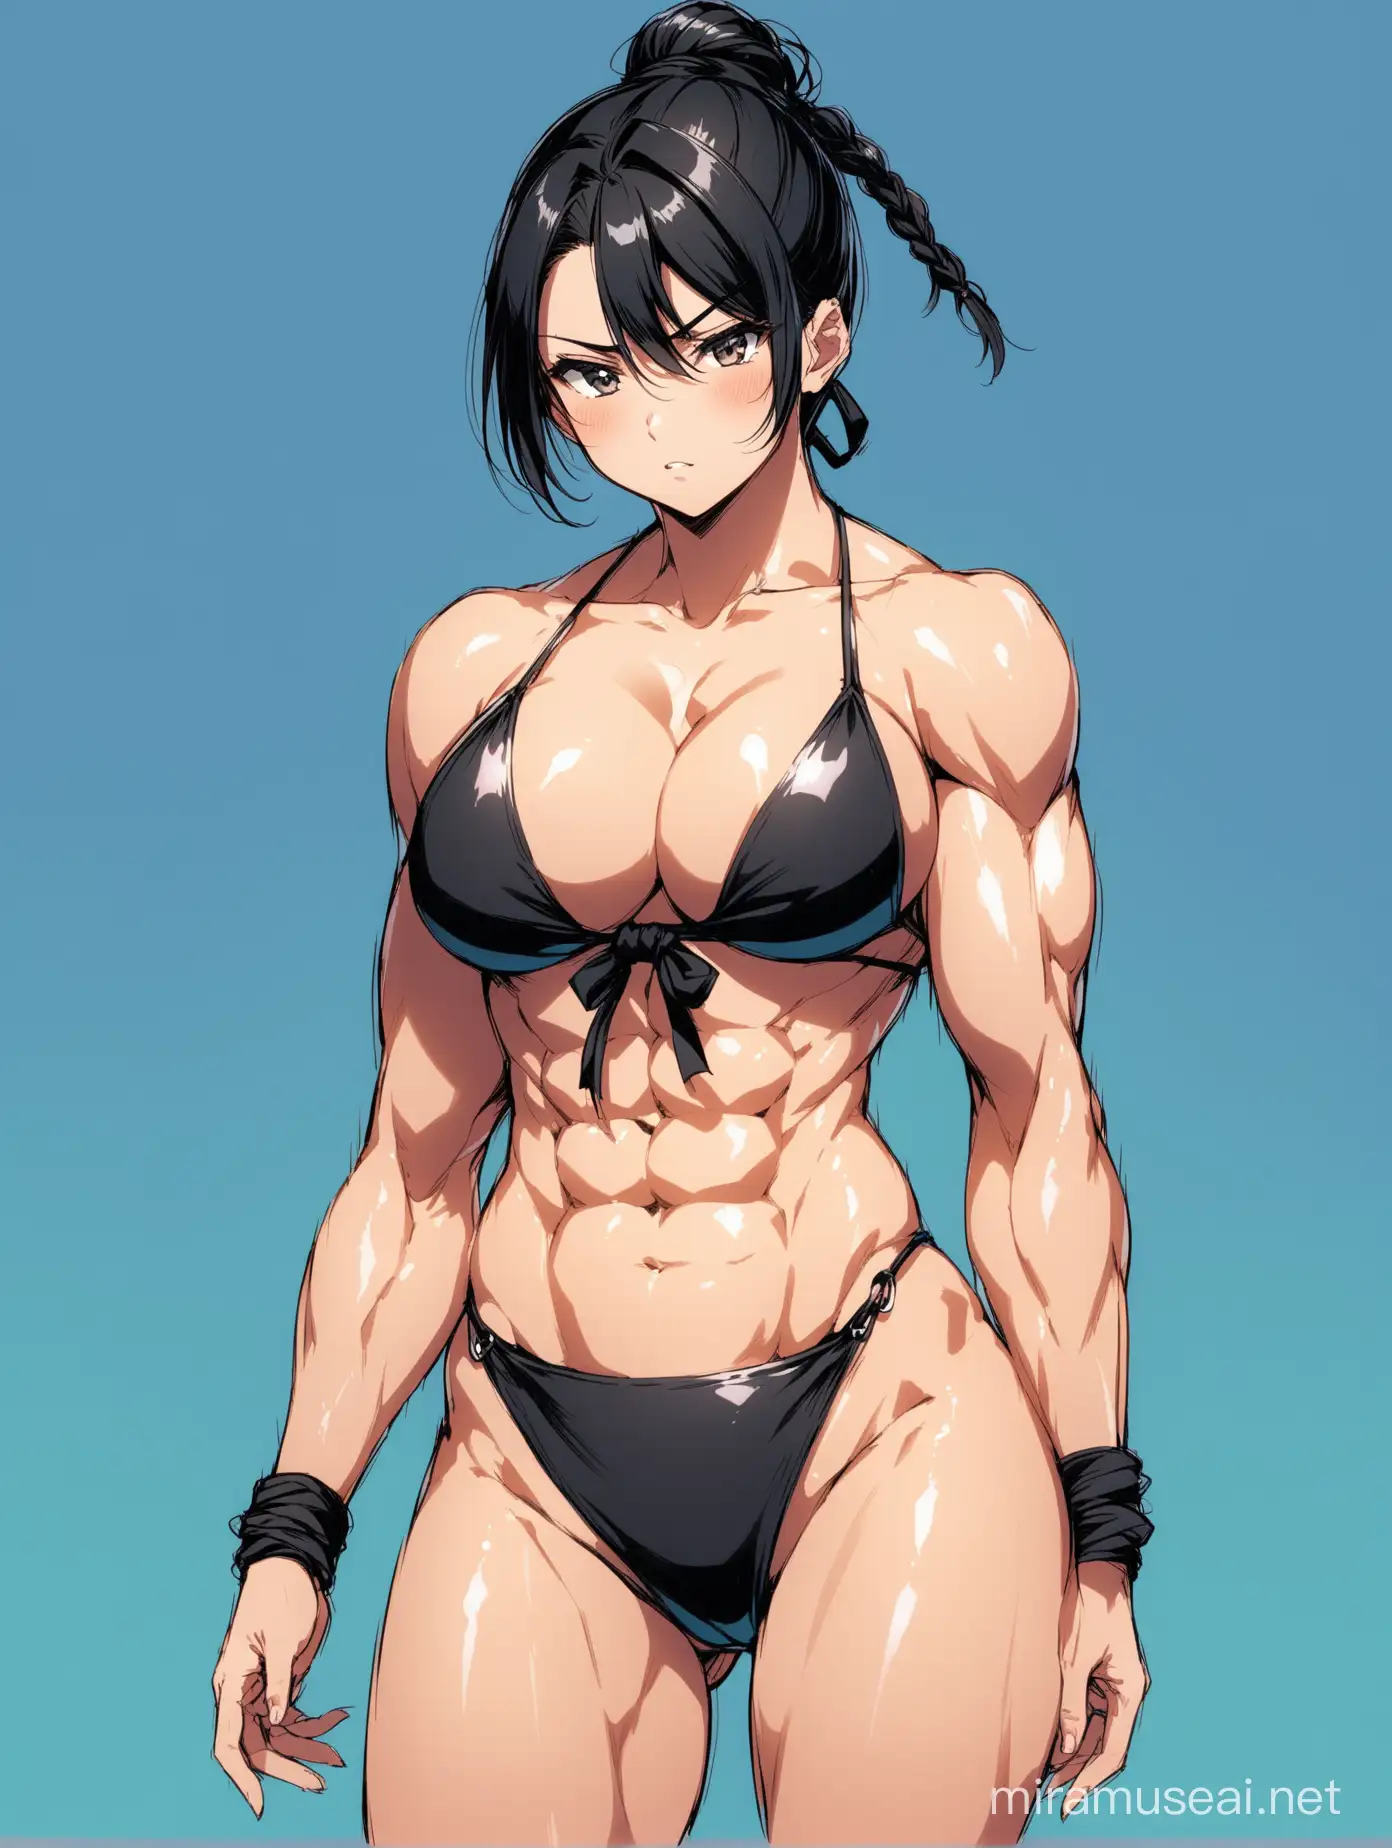 Muscular Woman in Anime Swimsuit